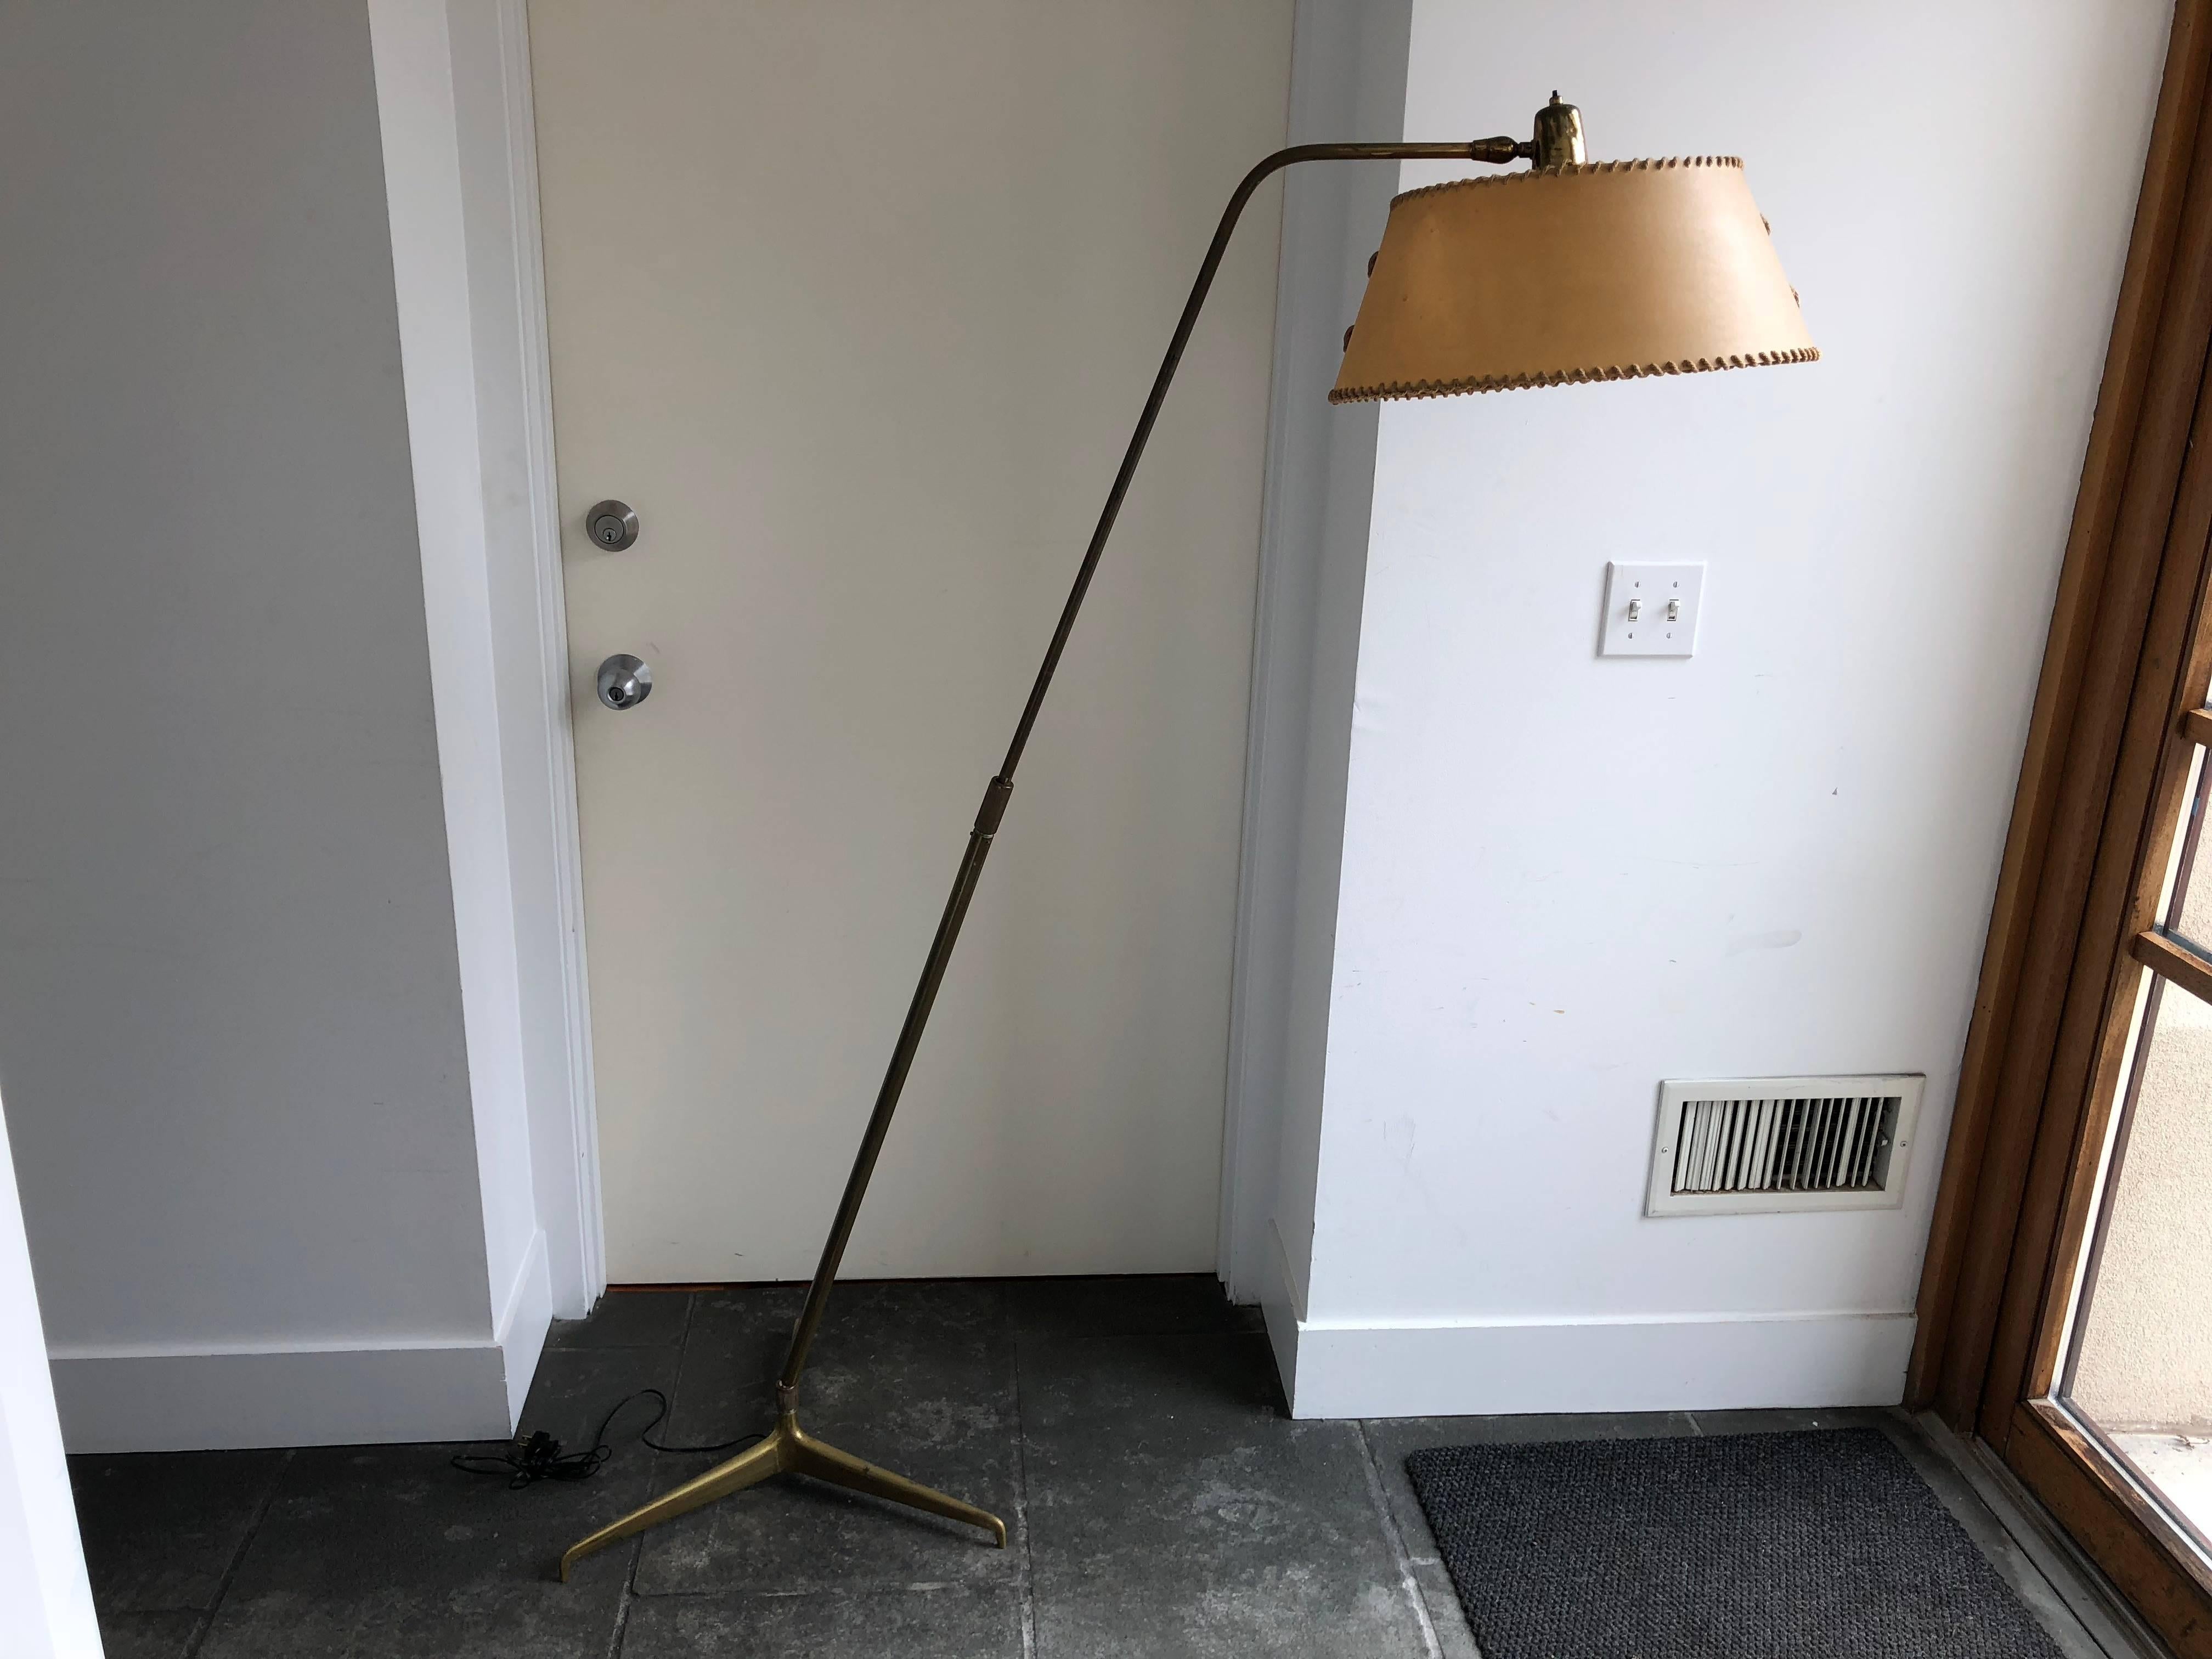 Vintage Italian brass adjustable floor lamp designed by Giuseppe Ostuni and manufactured by Oluce.  Has a brass tripod base and adjustable brass rod which holds the swivel height adjustable stem and parchment paper shade.  1950's

